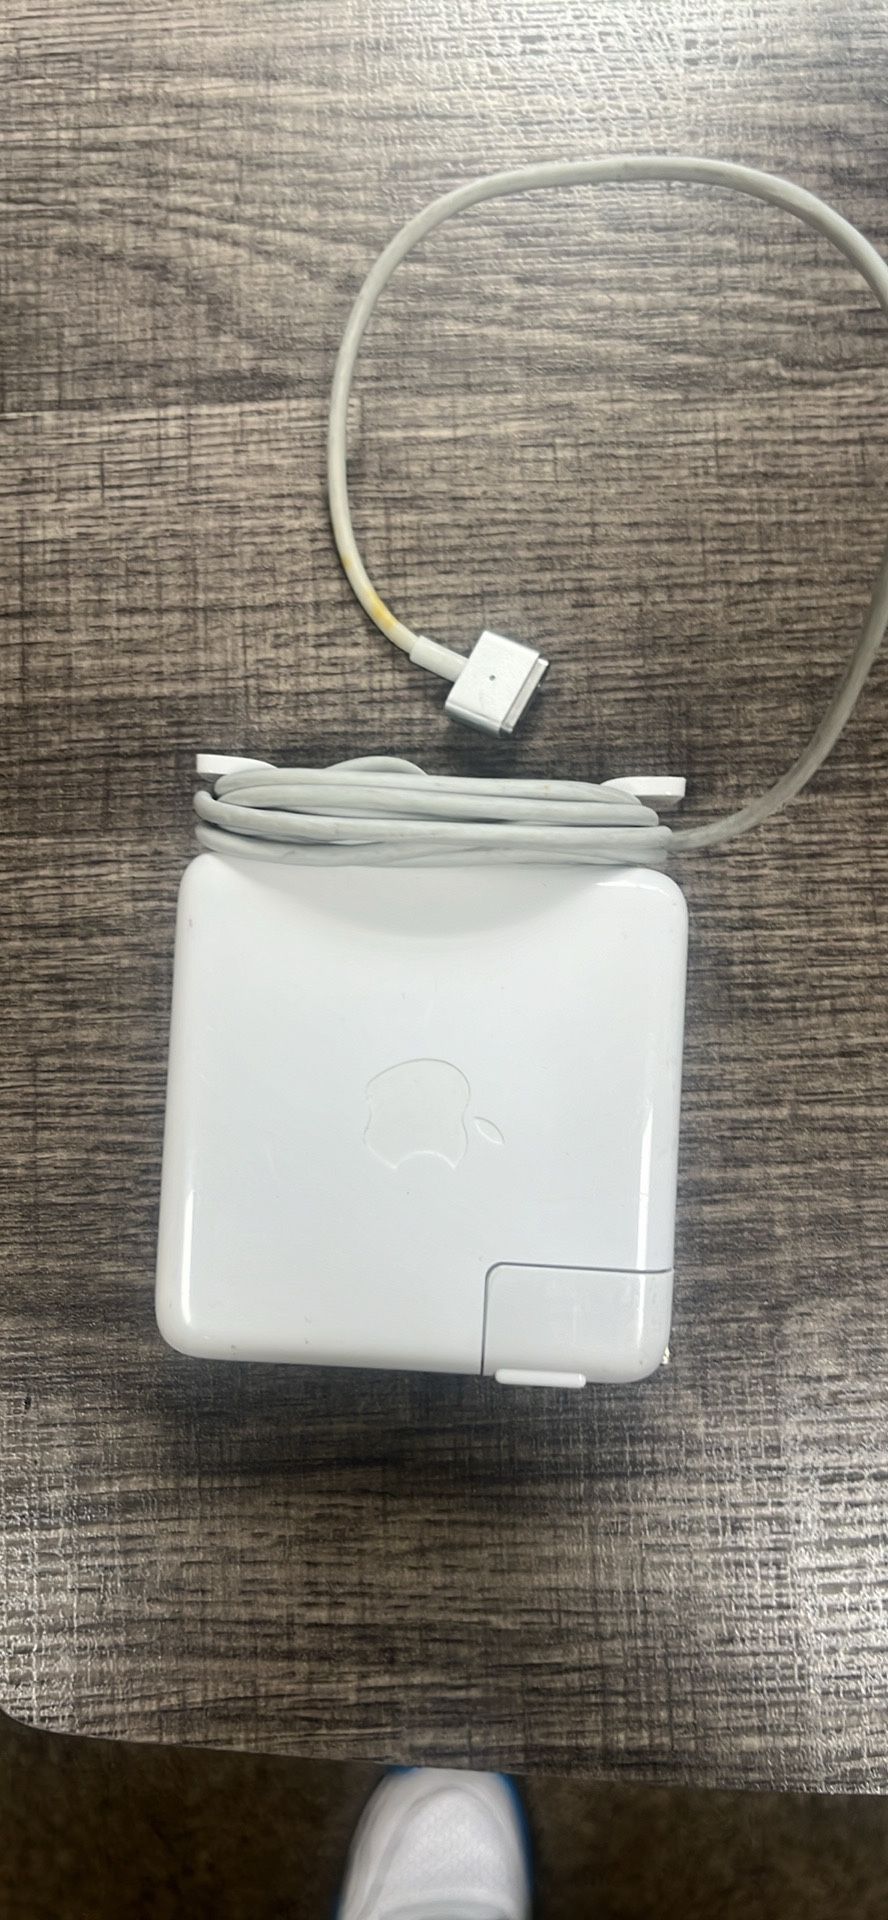 2012 Through 2015 Macbook Pro And Air Charger